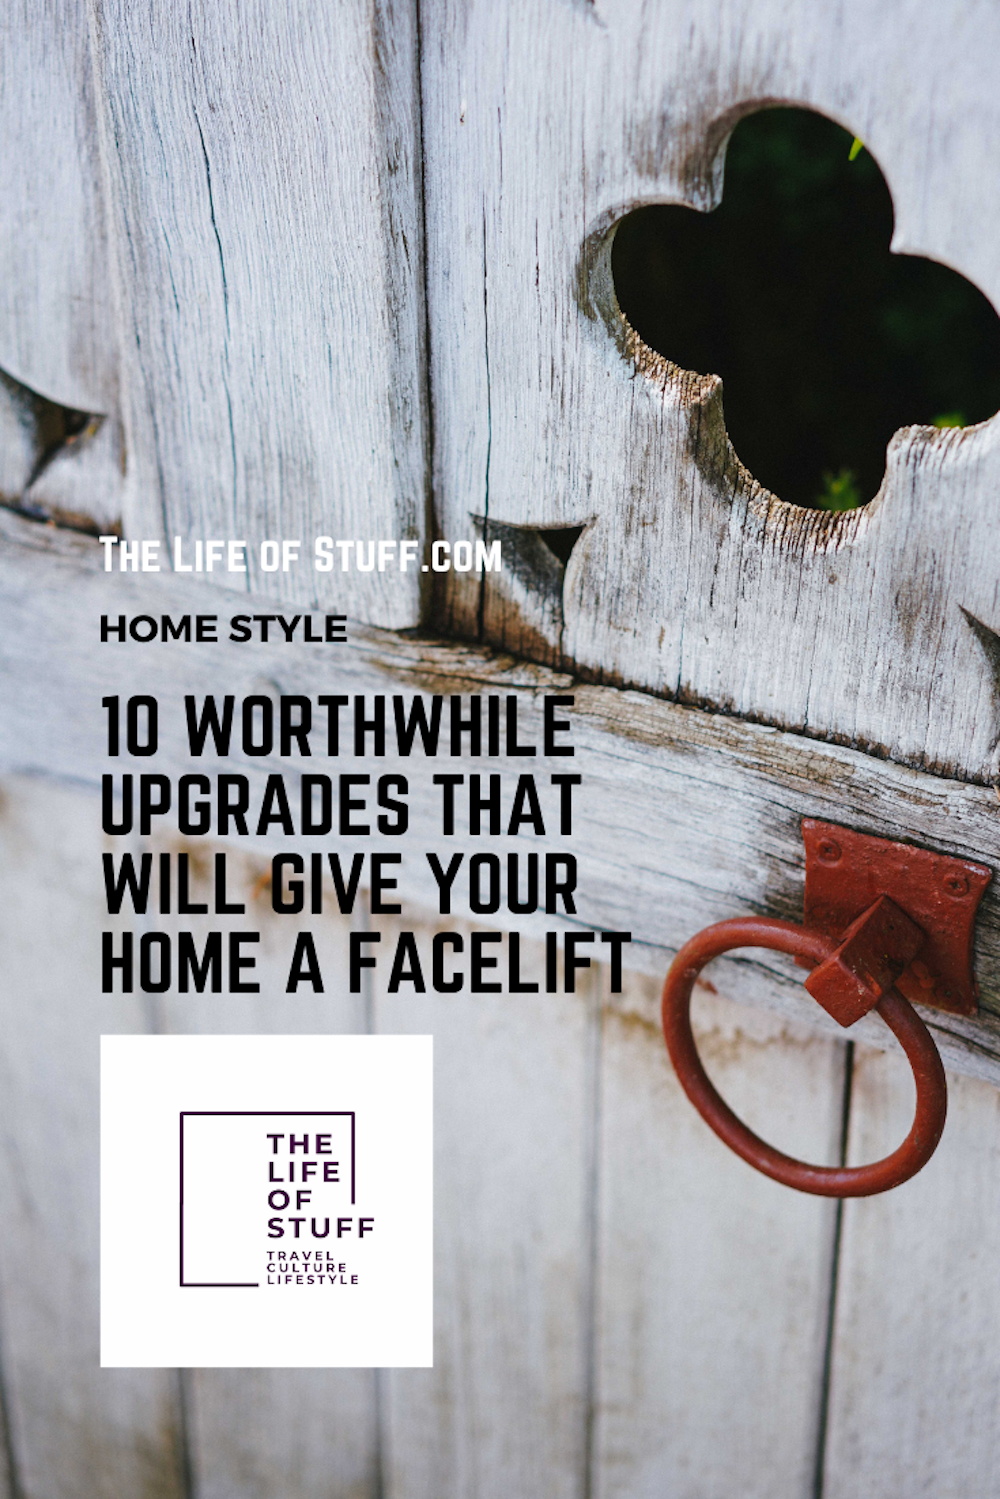 10 Worthwhile Upgrades That Will Give Your Home a Facelift - The Life of Stuff